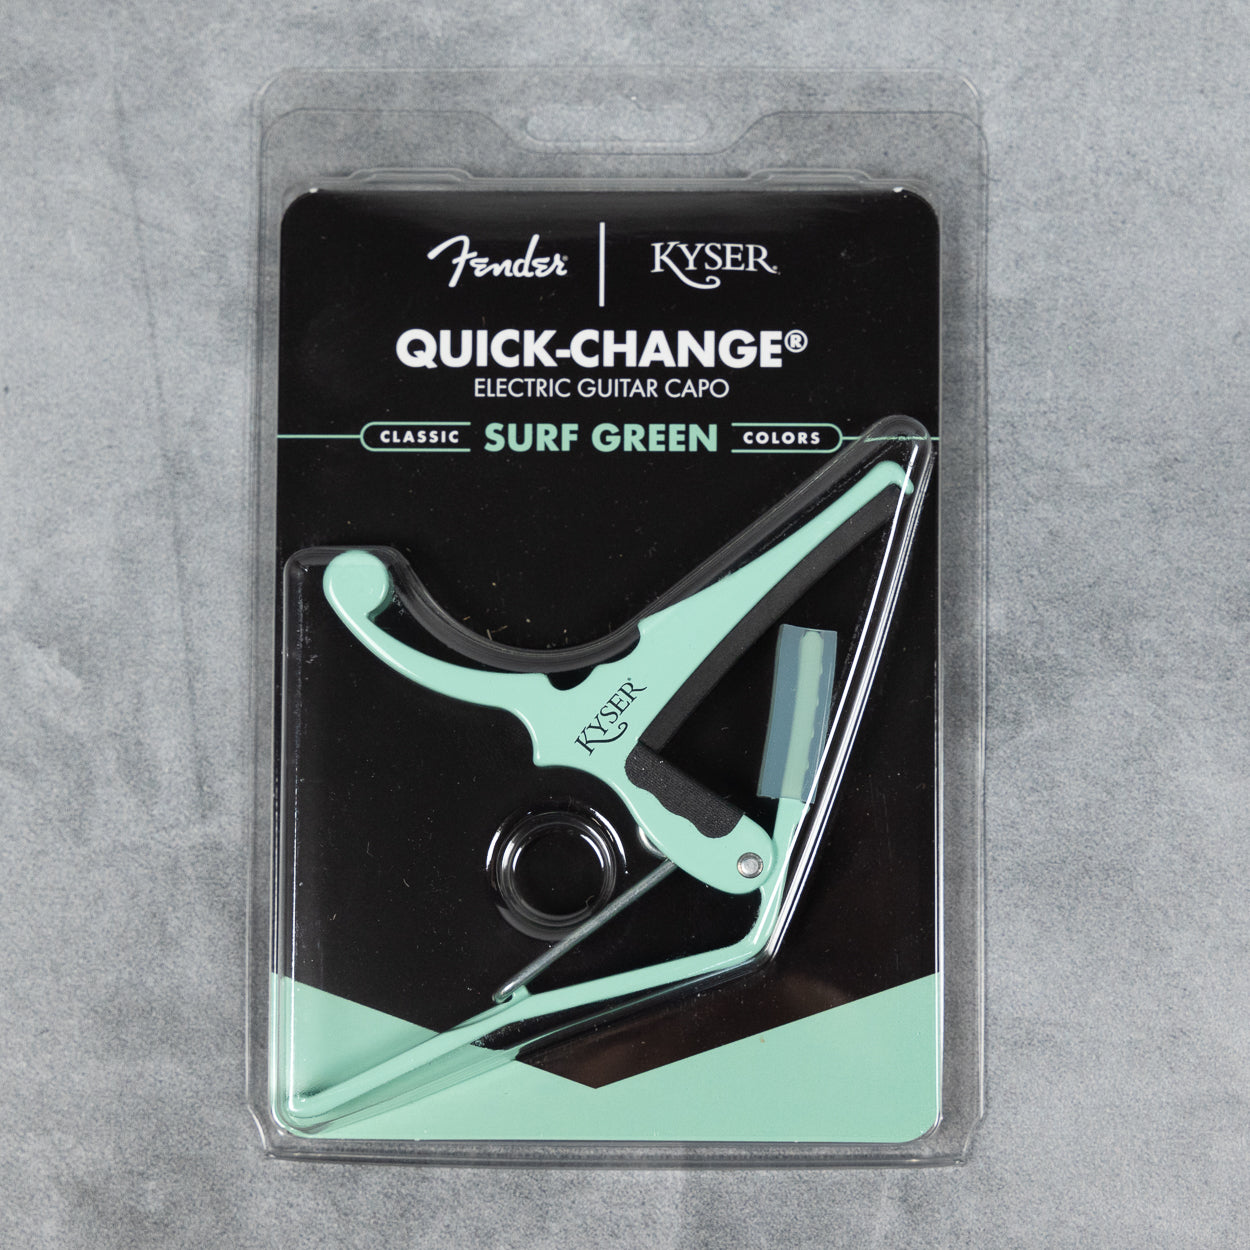 Kyser x Fender Quick-Change Electric Guitar Capo, Surf Green